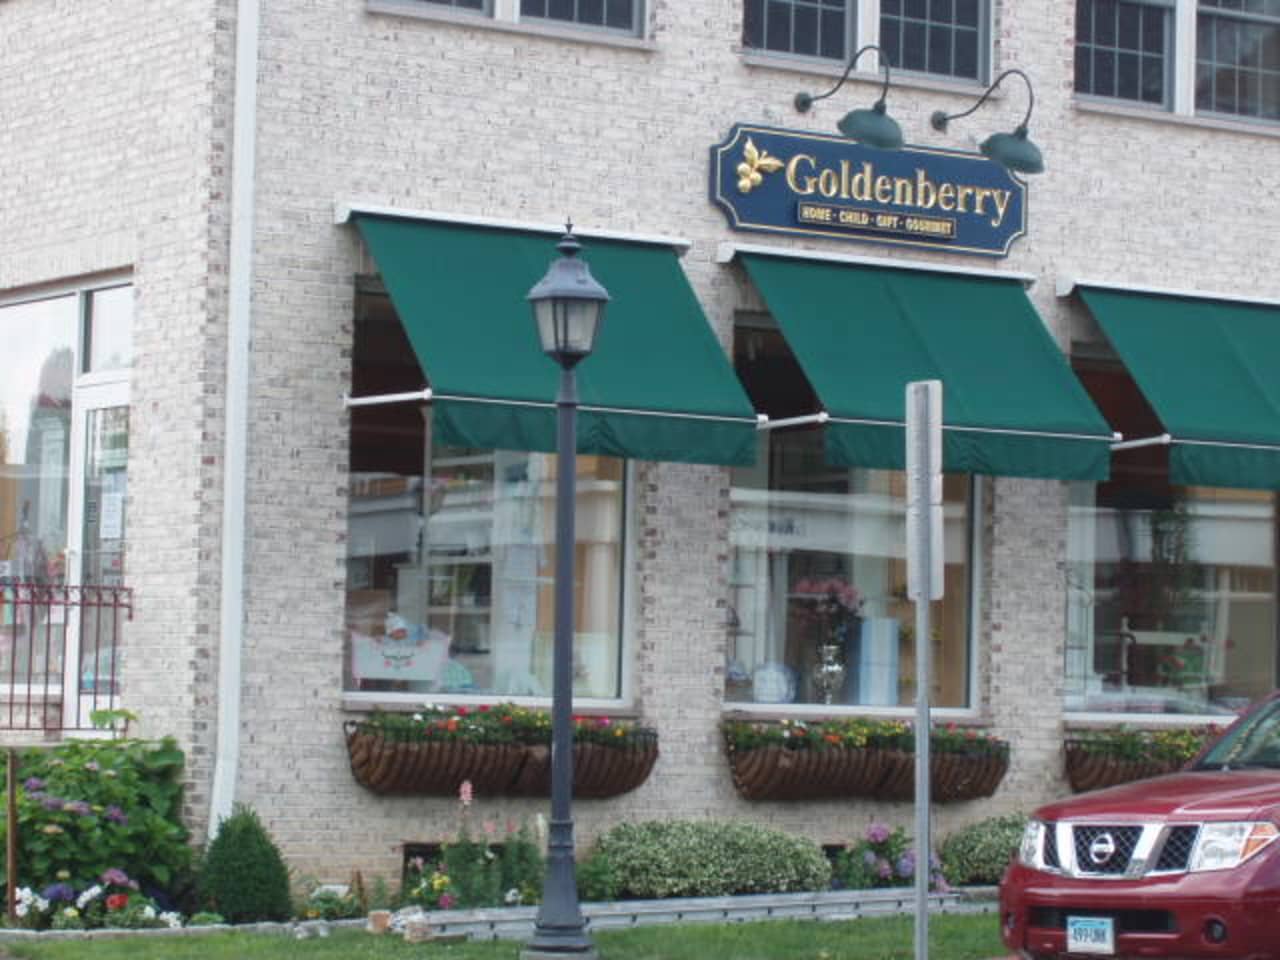 Goldenberry had its first day in business at its New Canaan location after about 23 years in Darien. 